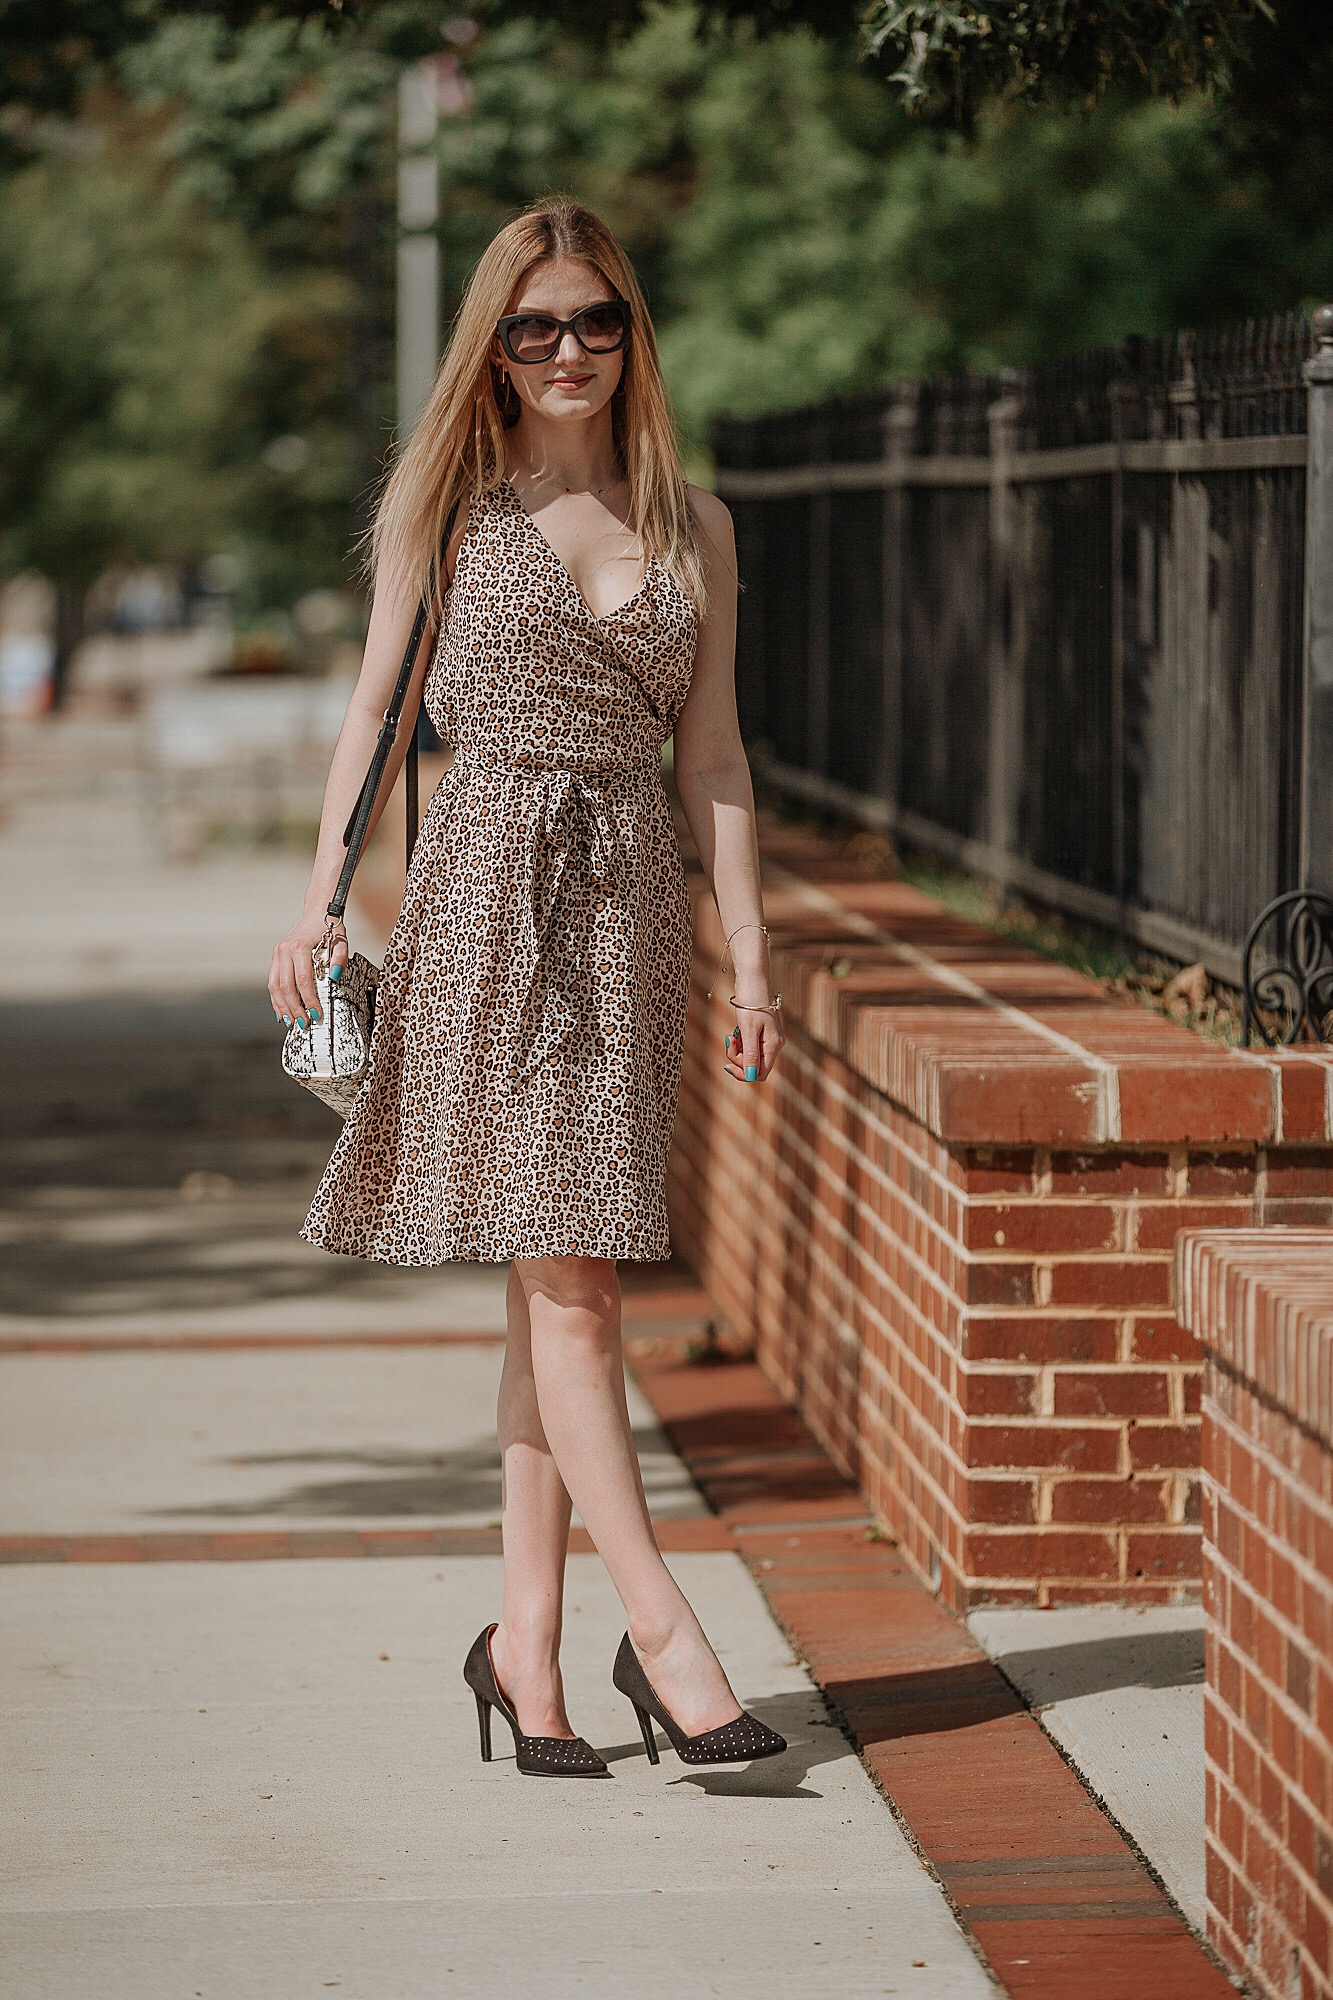 How To Style Leopard Print |Affordable leopard print midi sleeveless dress from Target, black studded heels by Christian Siriano for Payless, and a black and white snake skin purse from Coach. Fashion inspiration by North Carolina fashion and lifestyle blogger Jessica Linn from Linn Style